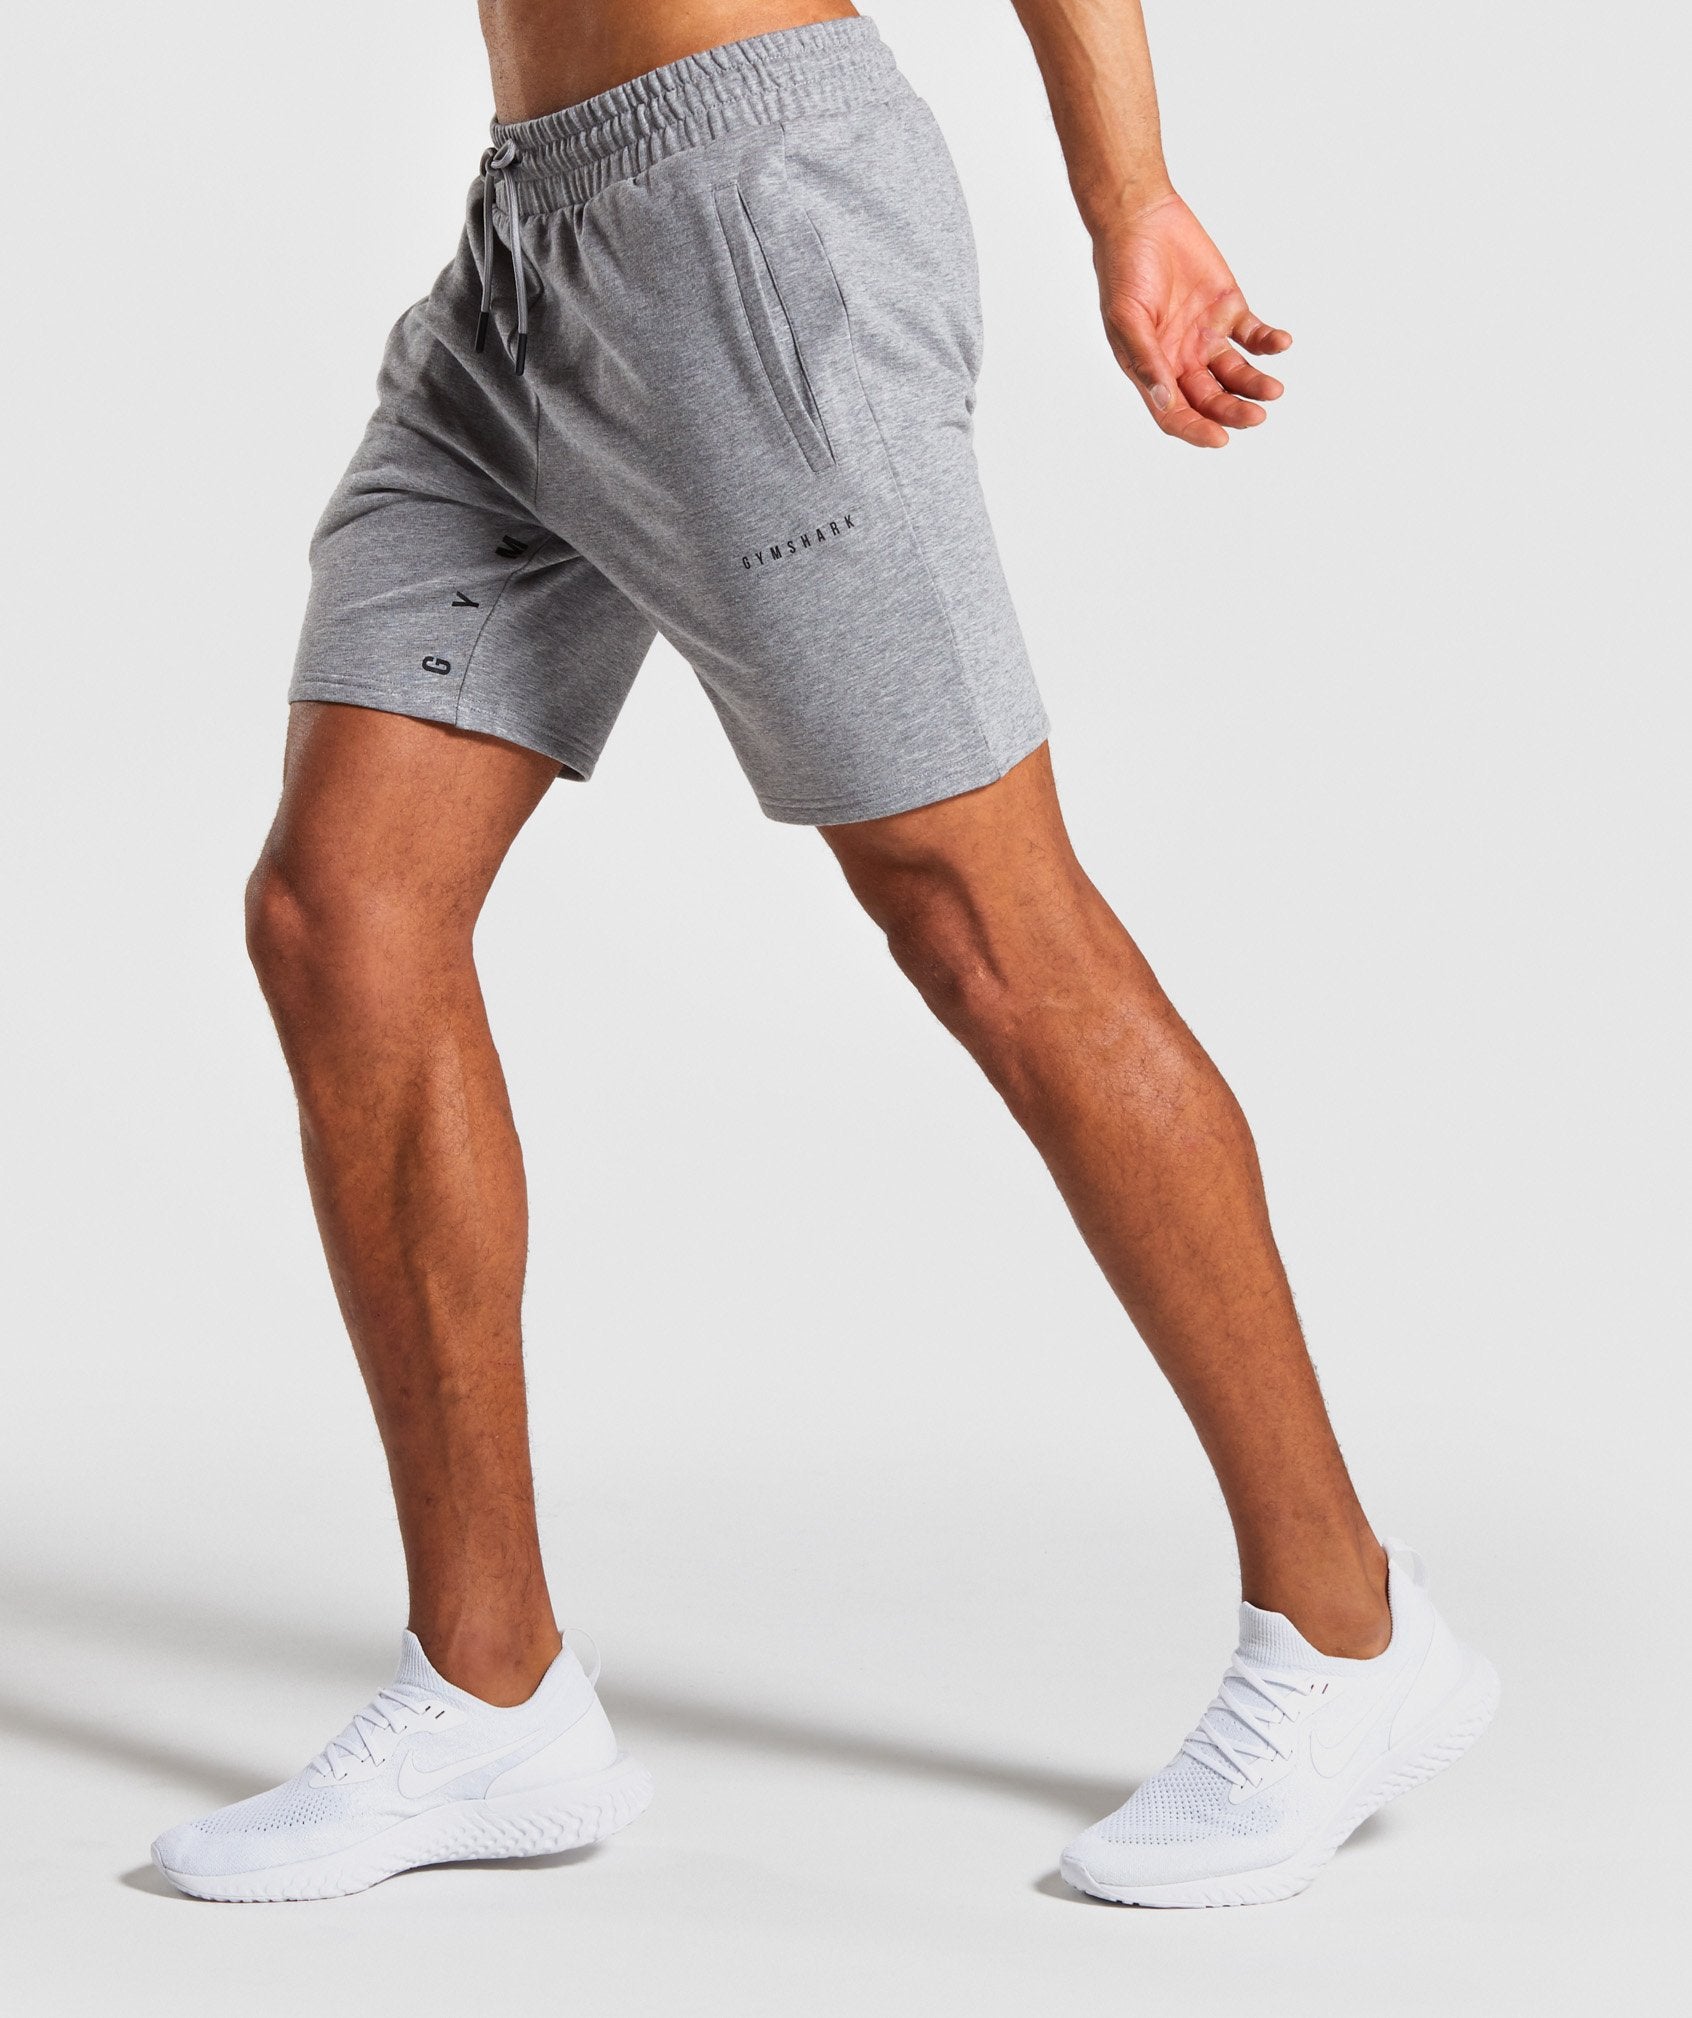 Contrast Shorts in Grey - view 3